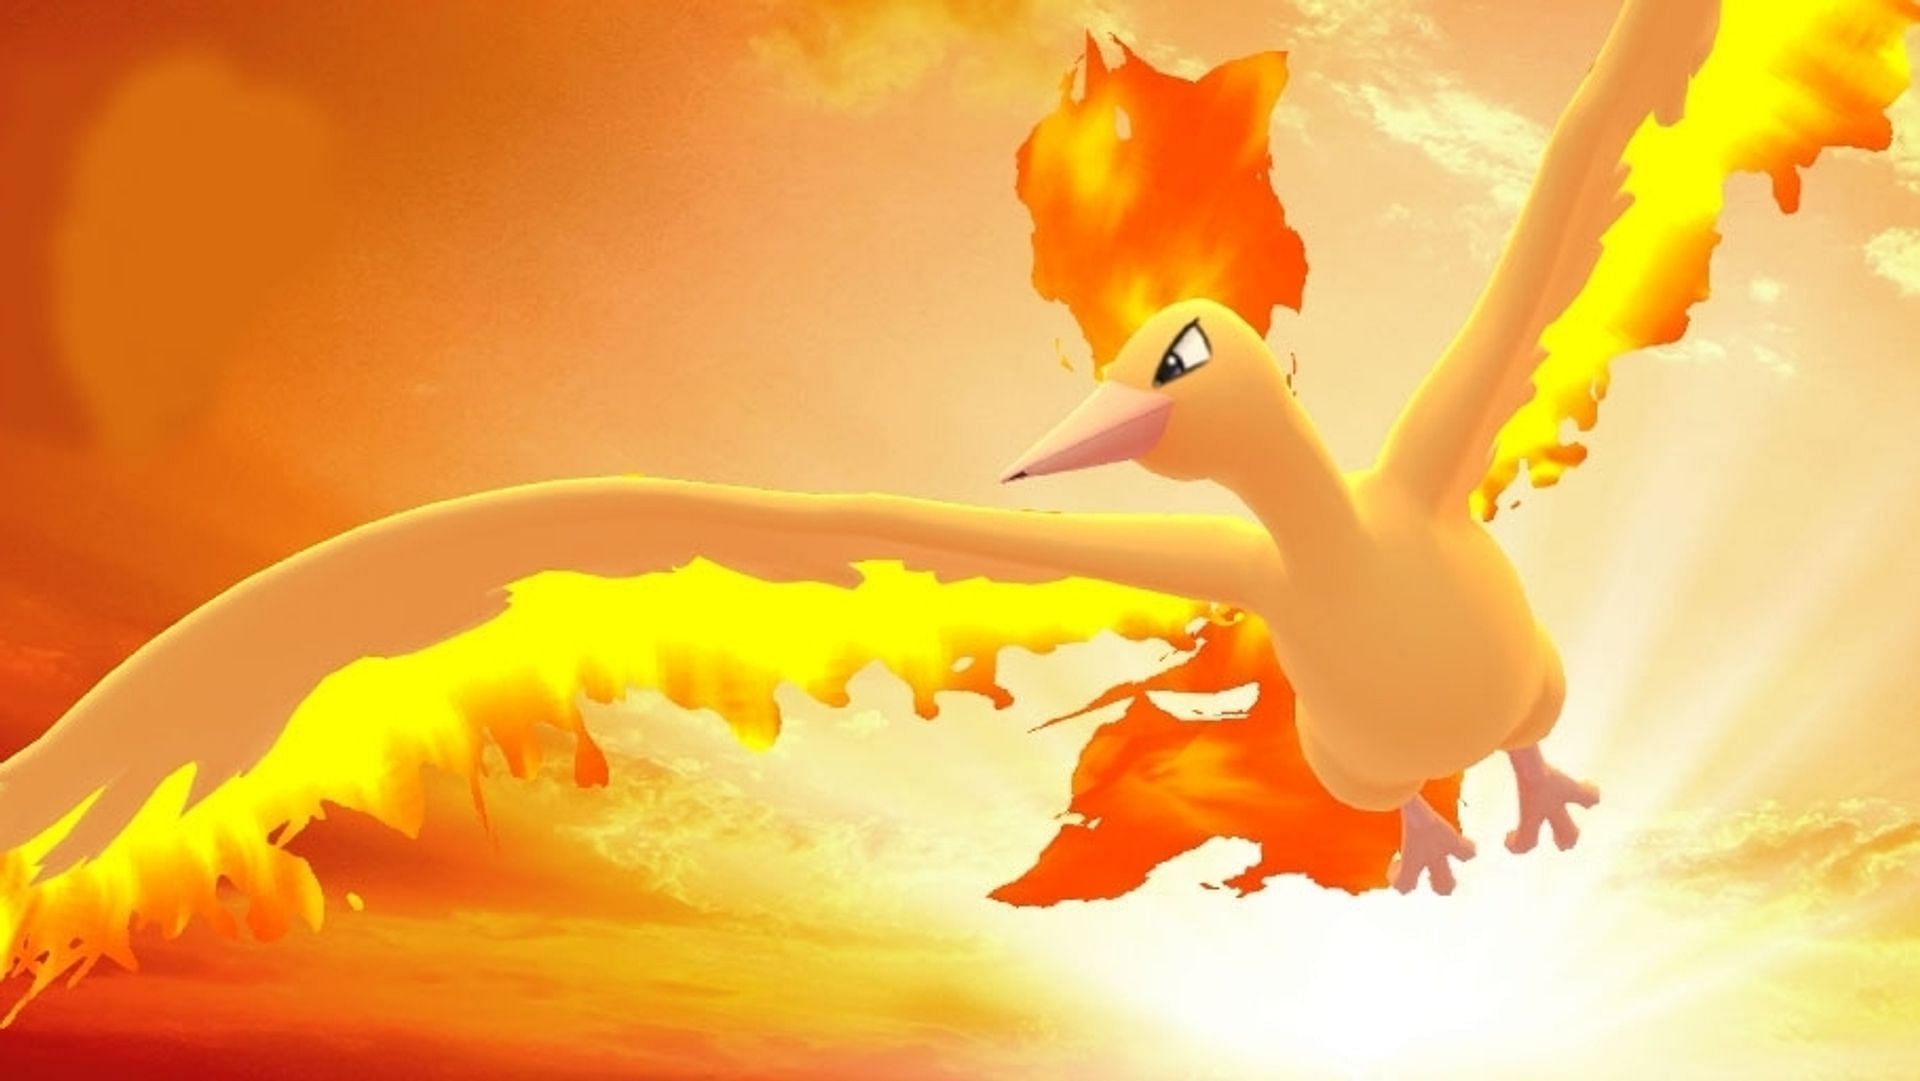 Promotional Imagery showing Moltres in Pokemon GO (Image via The Pokemon Company)